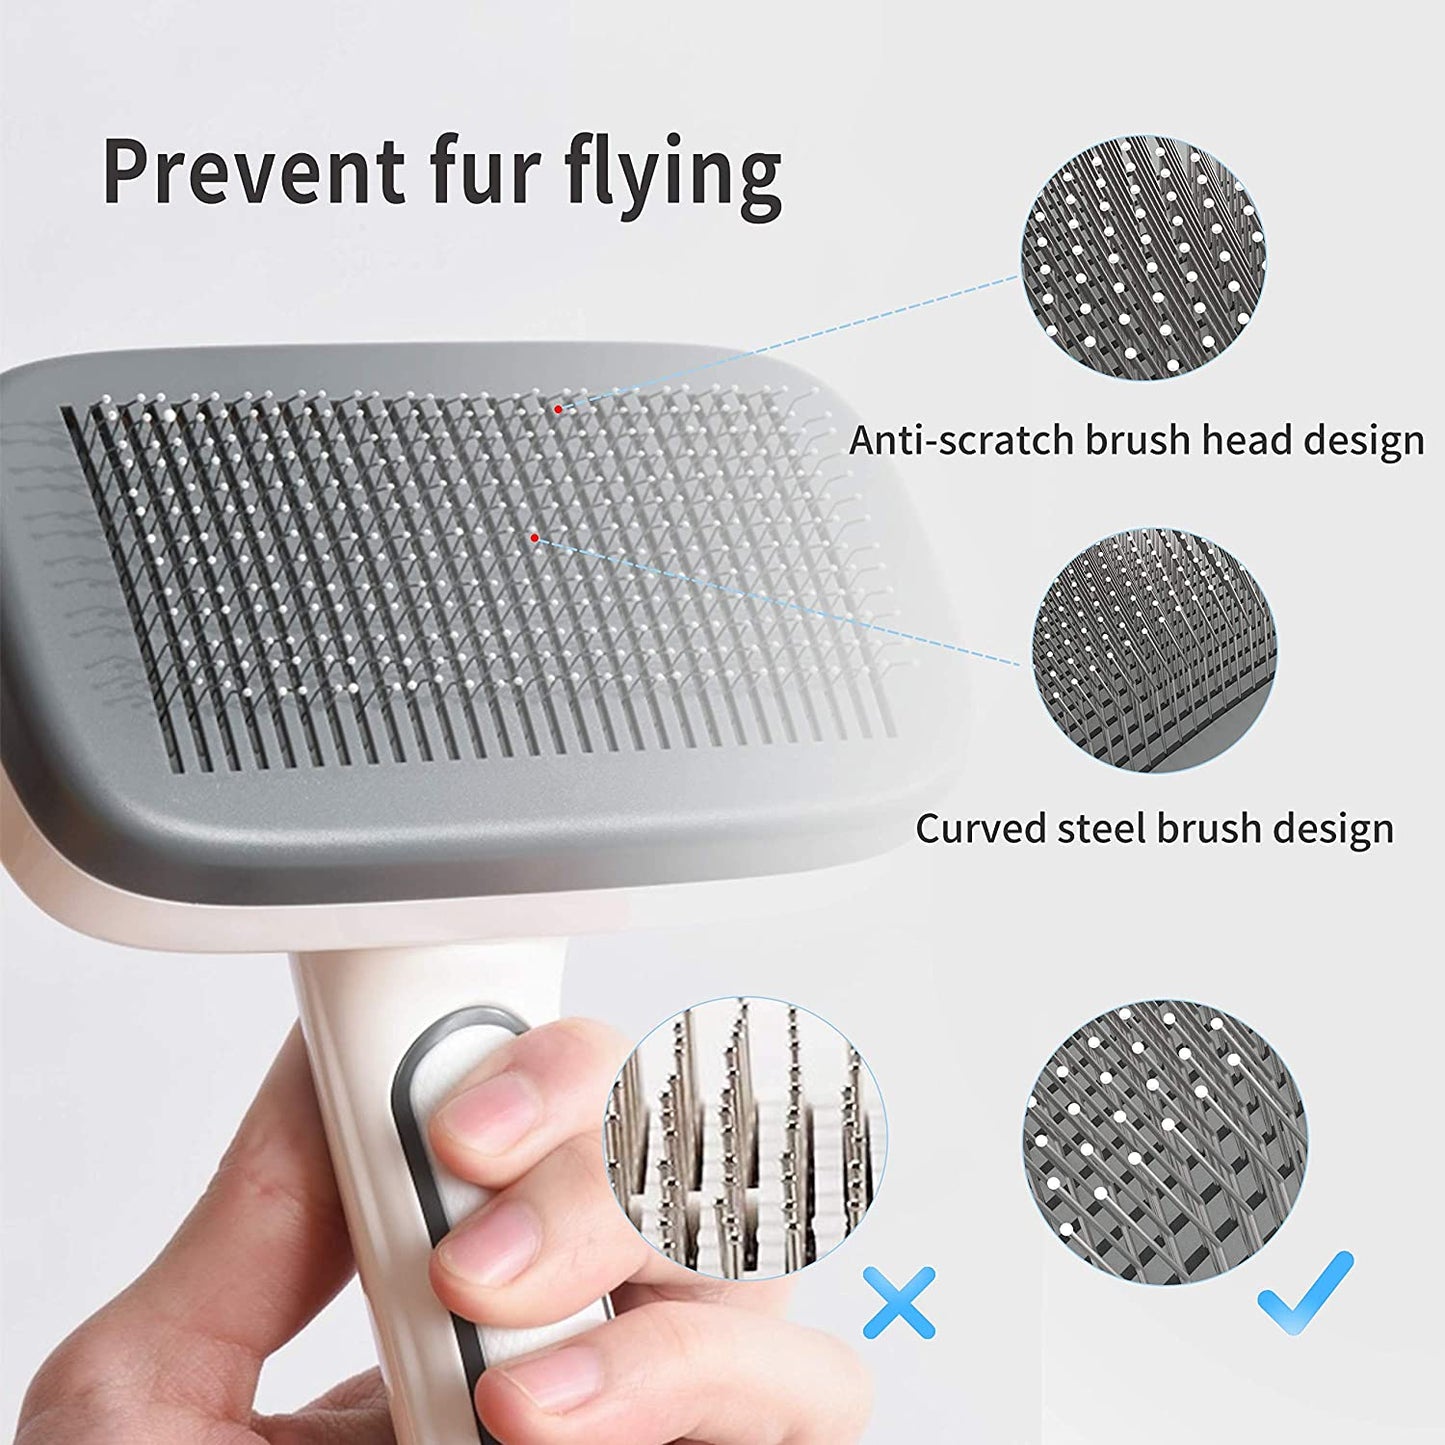 Self Cleaning Dog Brush for Long Haired Short Haired Dogs, Slicker Brush for Dogs Shedding Grooming, Dog Hair Brush for Large Medium Pets, Wire Cat Fur Brush, Pet Brush for Cats, Pet Hair Comb